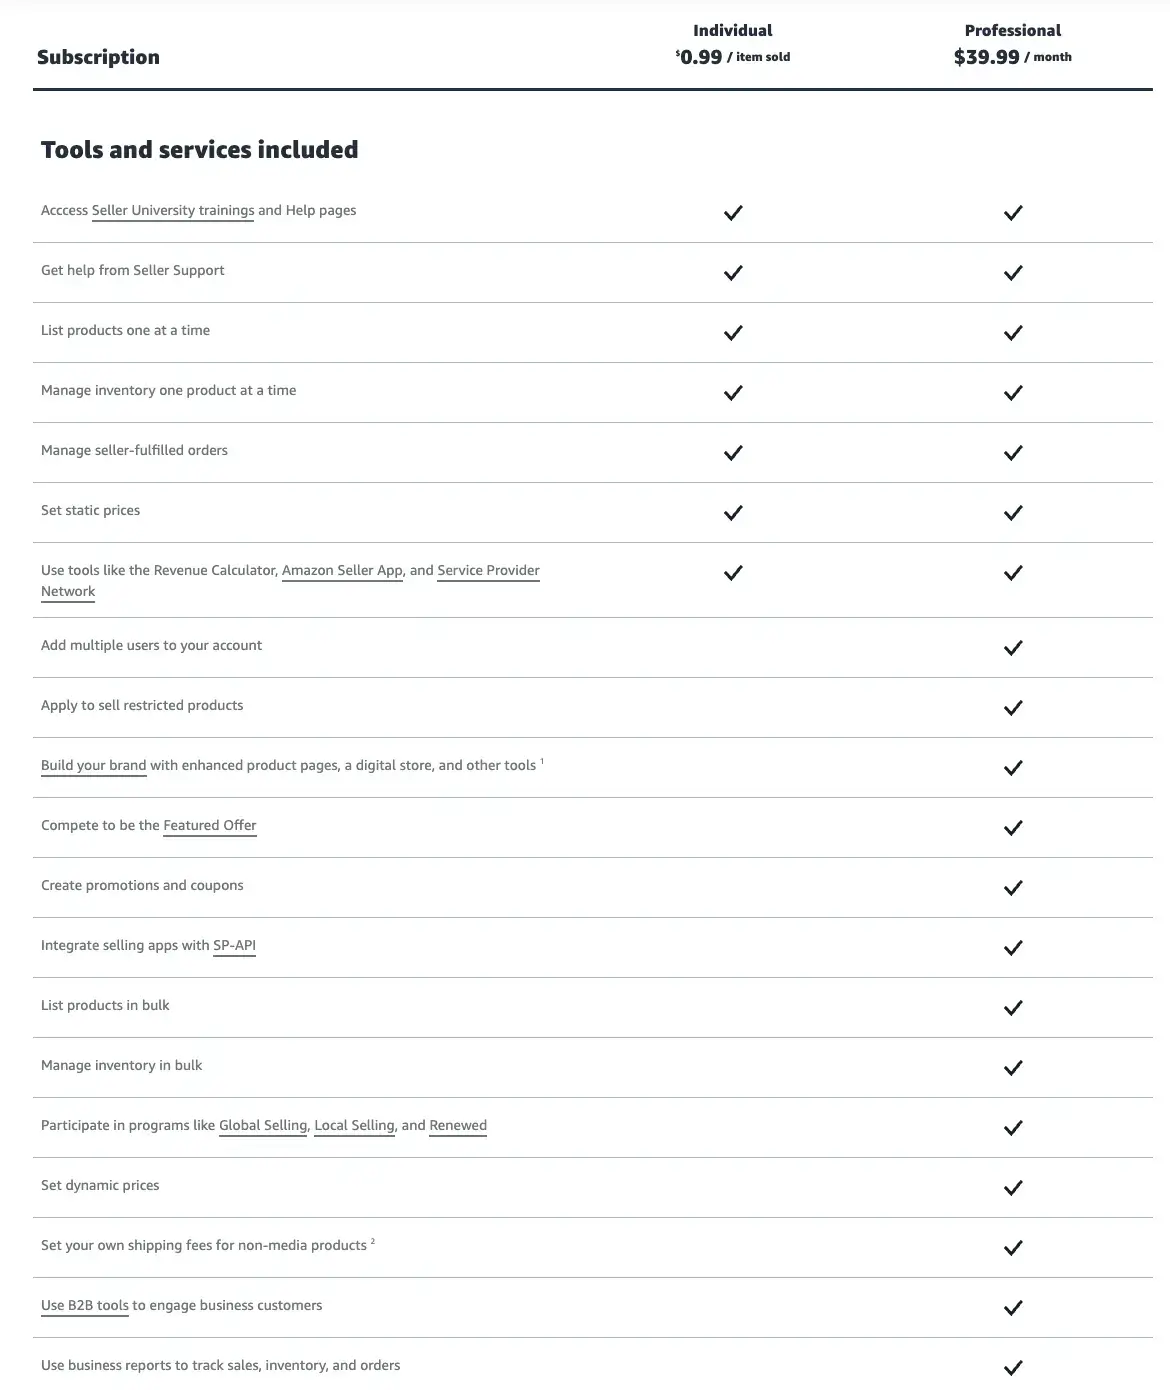 A table breaking down the tools and services included in Amazon Individual vs Professional plans. 